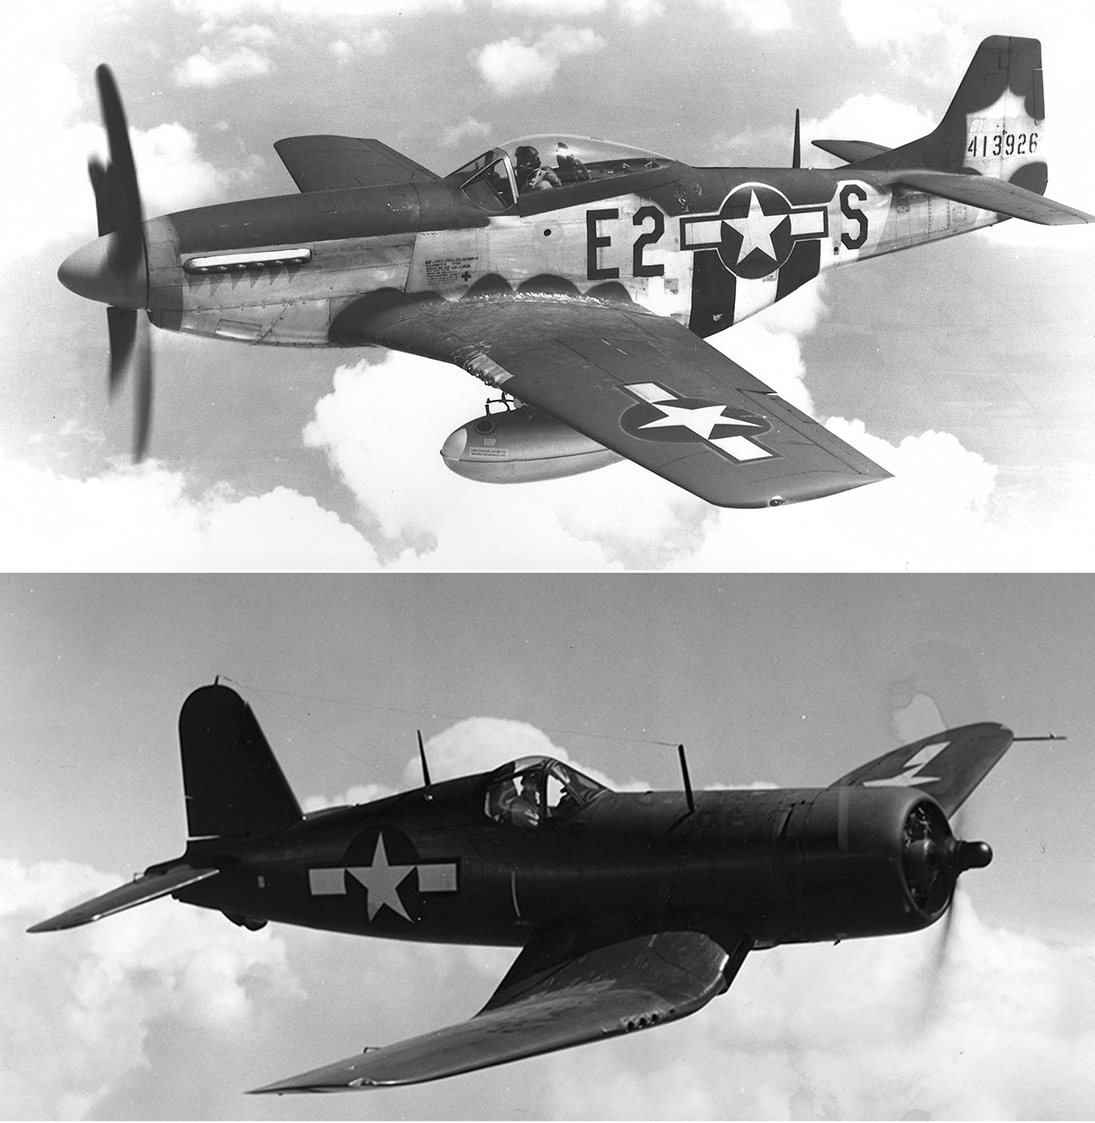 Mustang vs. Corsair – Inside the U.S. Navy’s 1944 Match-Up Between the Two Fighters